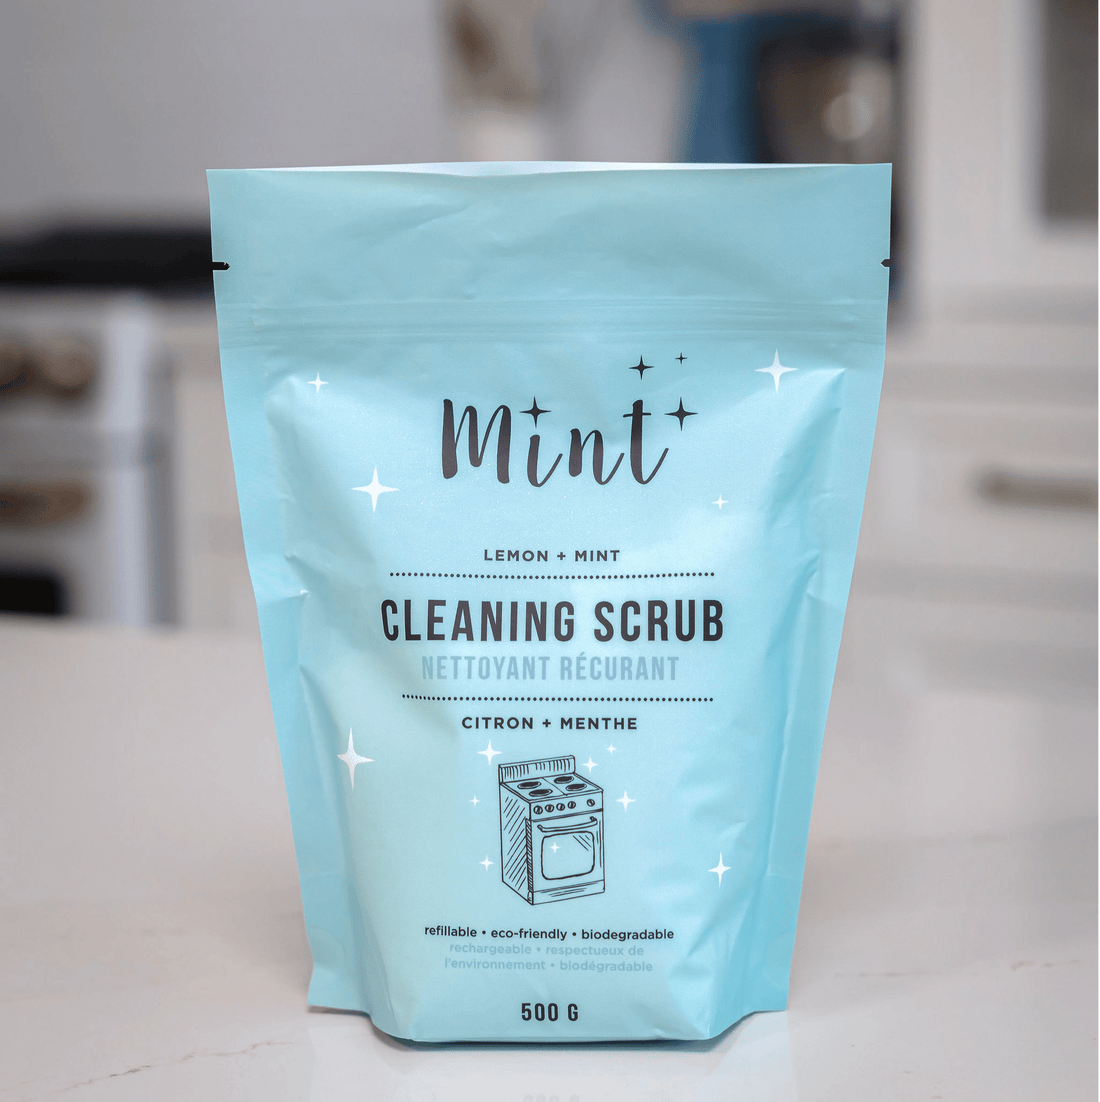 Mint Cleaning Scrub refill pouch (500g) with Lemon + Mint scent, placed on a kitchen counter. The pouch is designed for easy refilling and features labels indicating its eco-friendly and biodegradable nature.